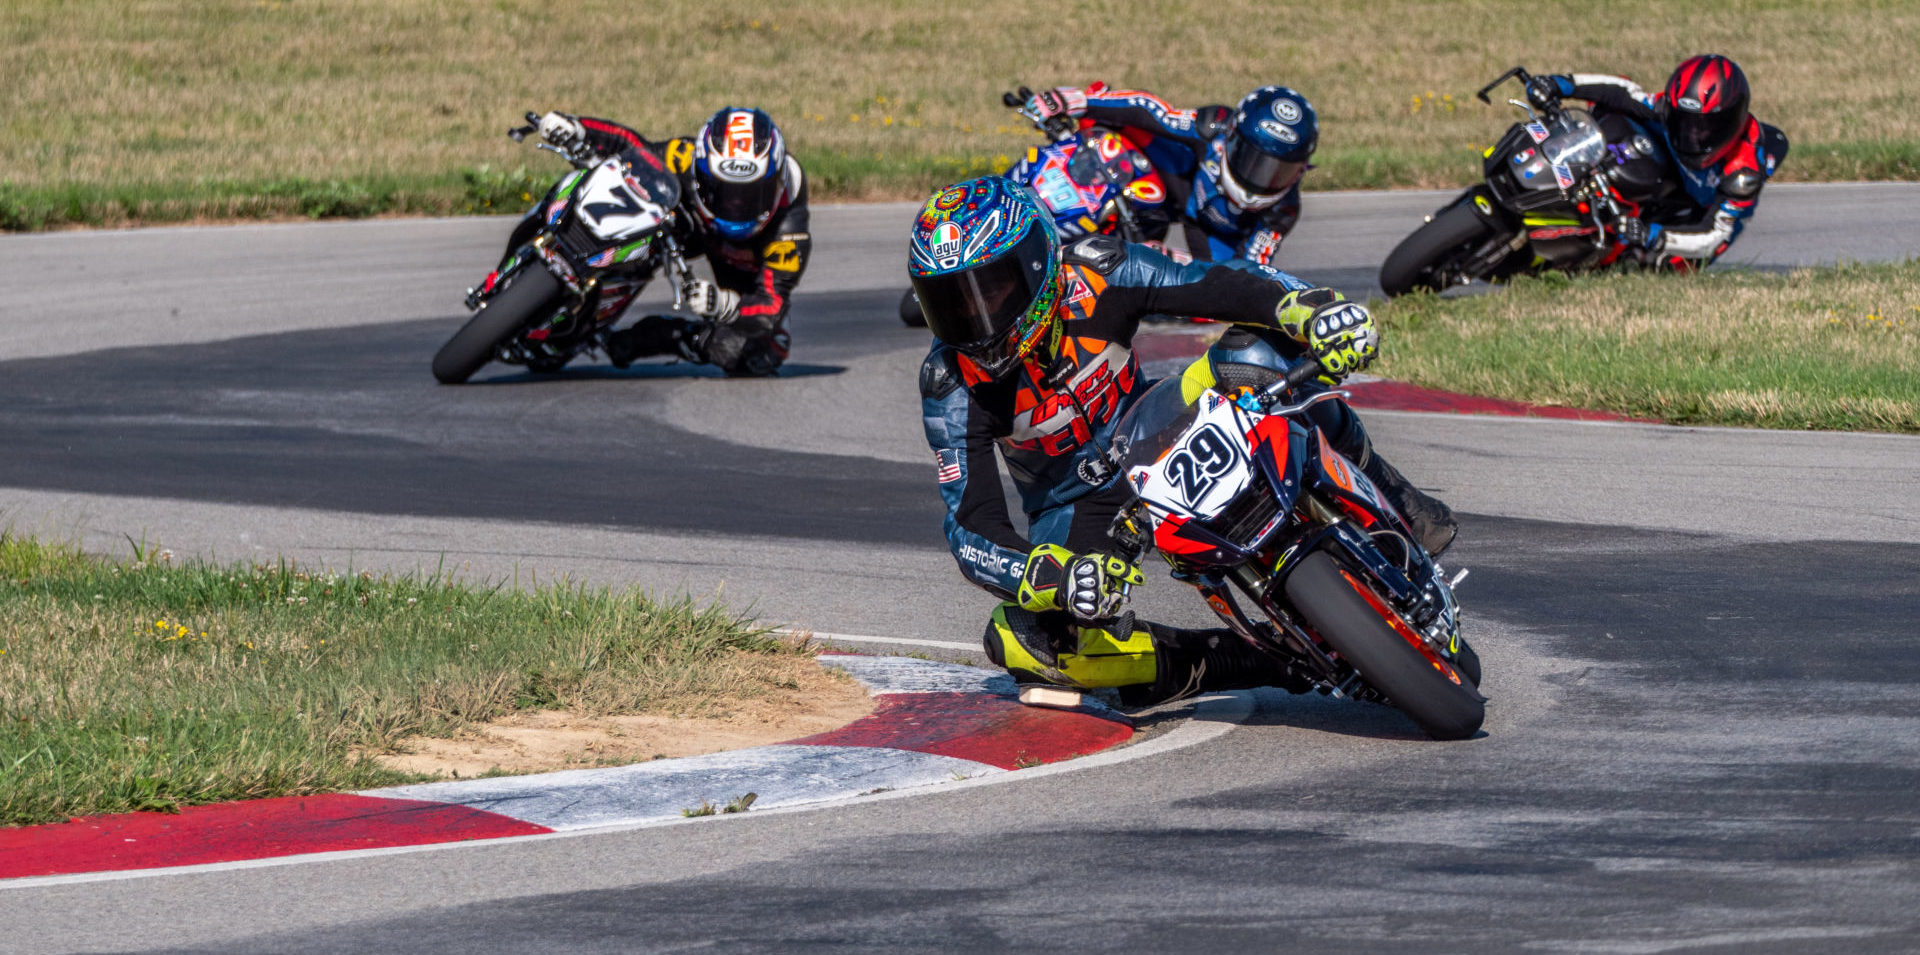 Motul is sponsoring both the MotoAmerica Mini Cup and the King Of The Baggers classes in 2022. Photo courtesy Motul.